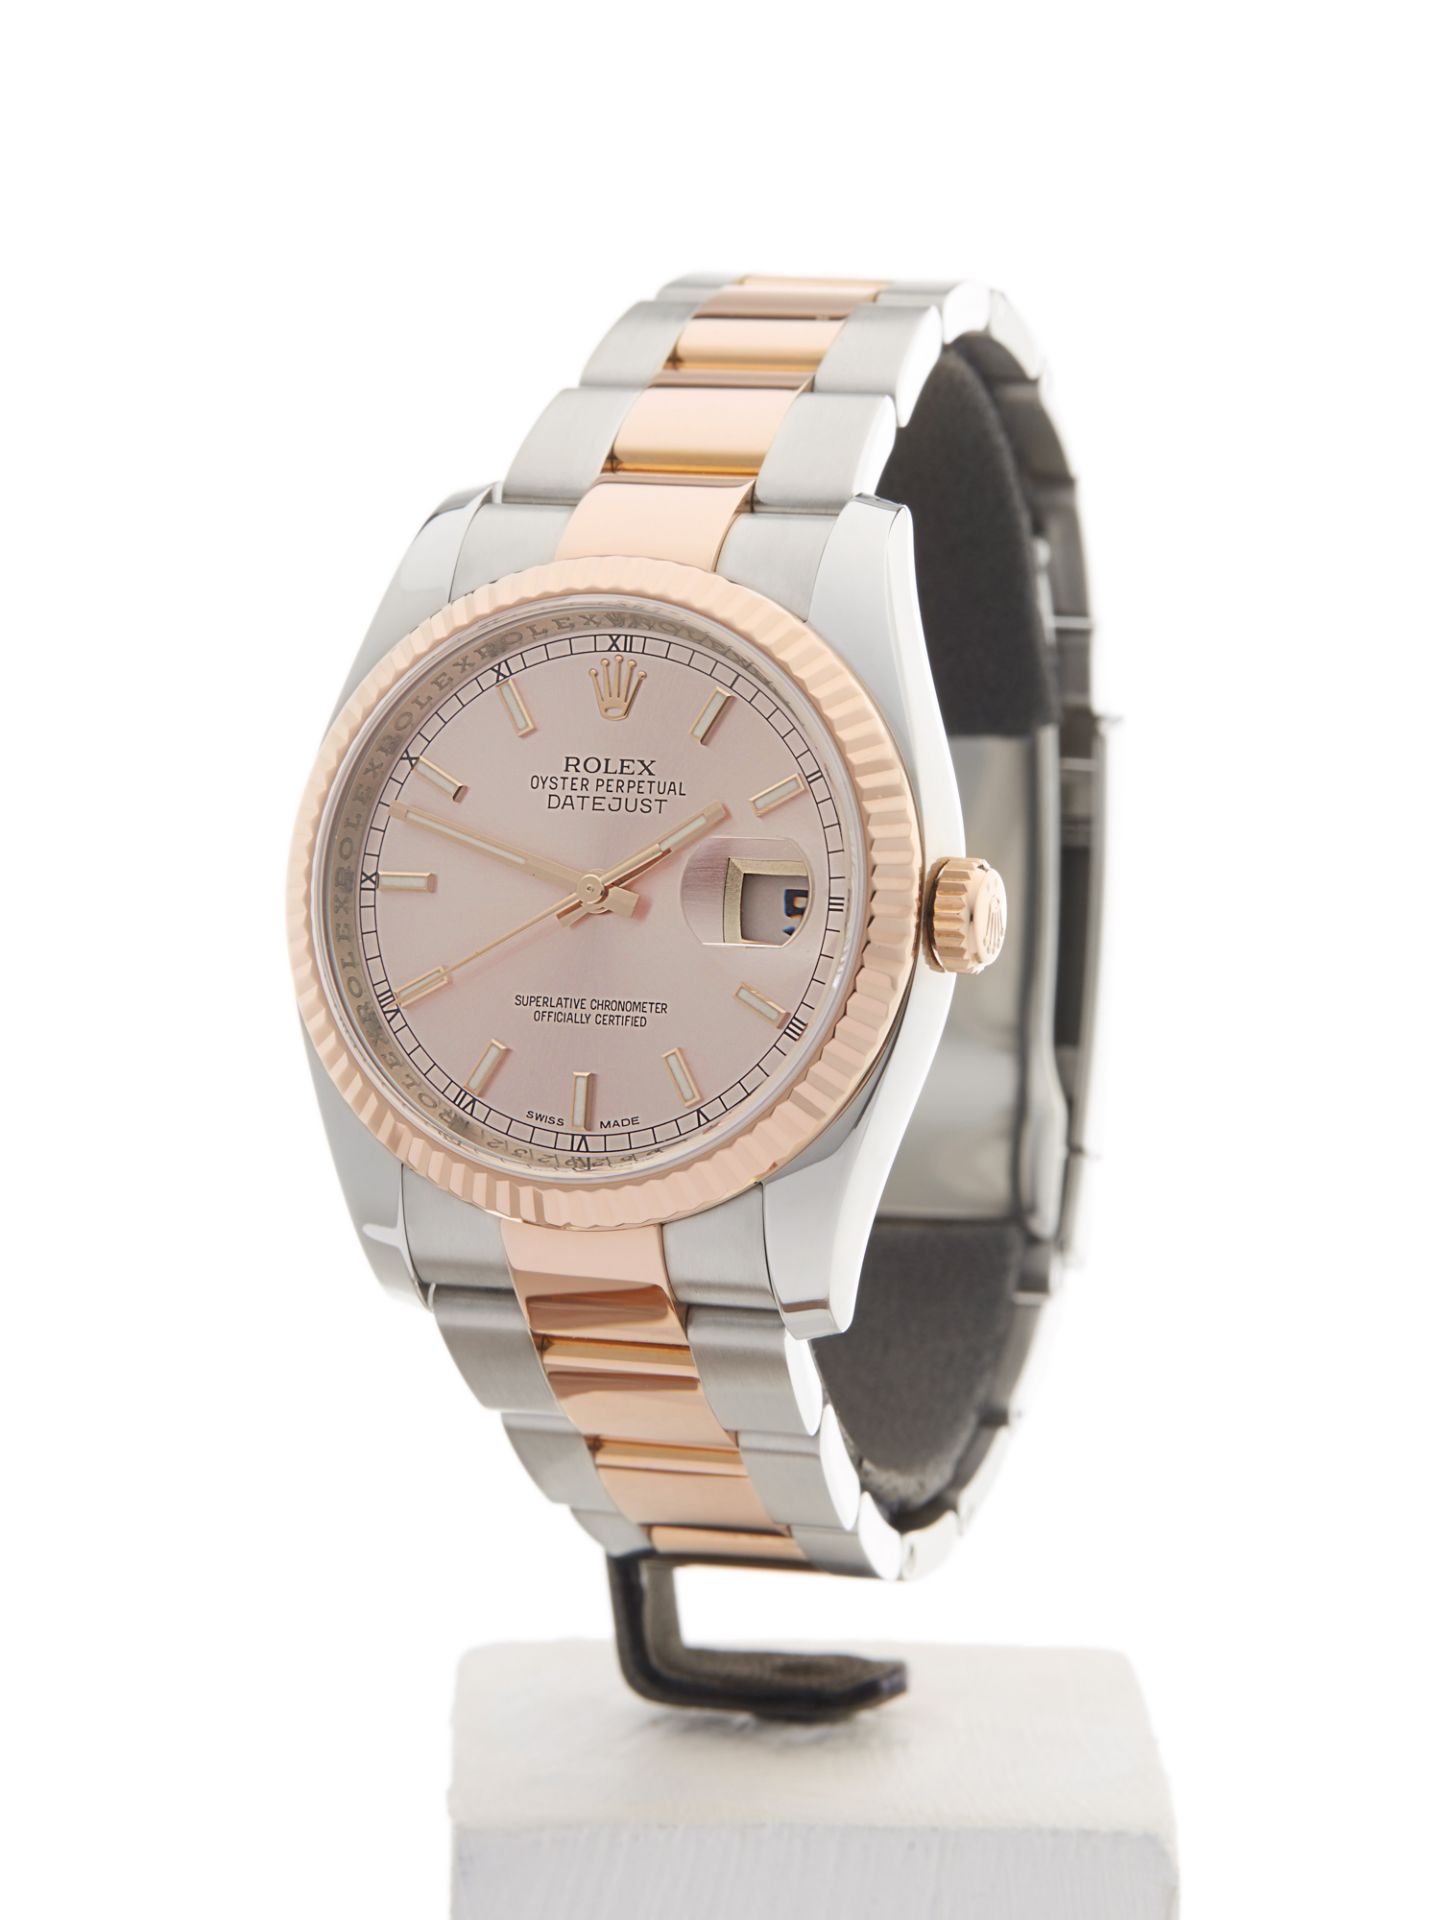 Rolex Datejust 36mm Stainless Steel & 18k Rose Gold 116231